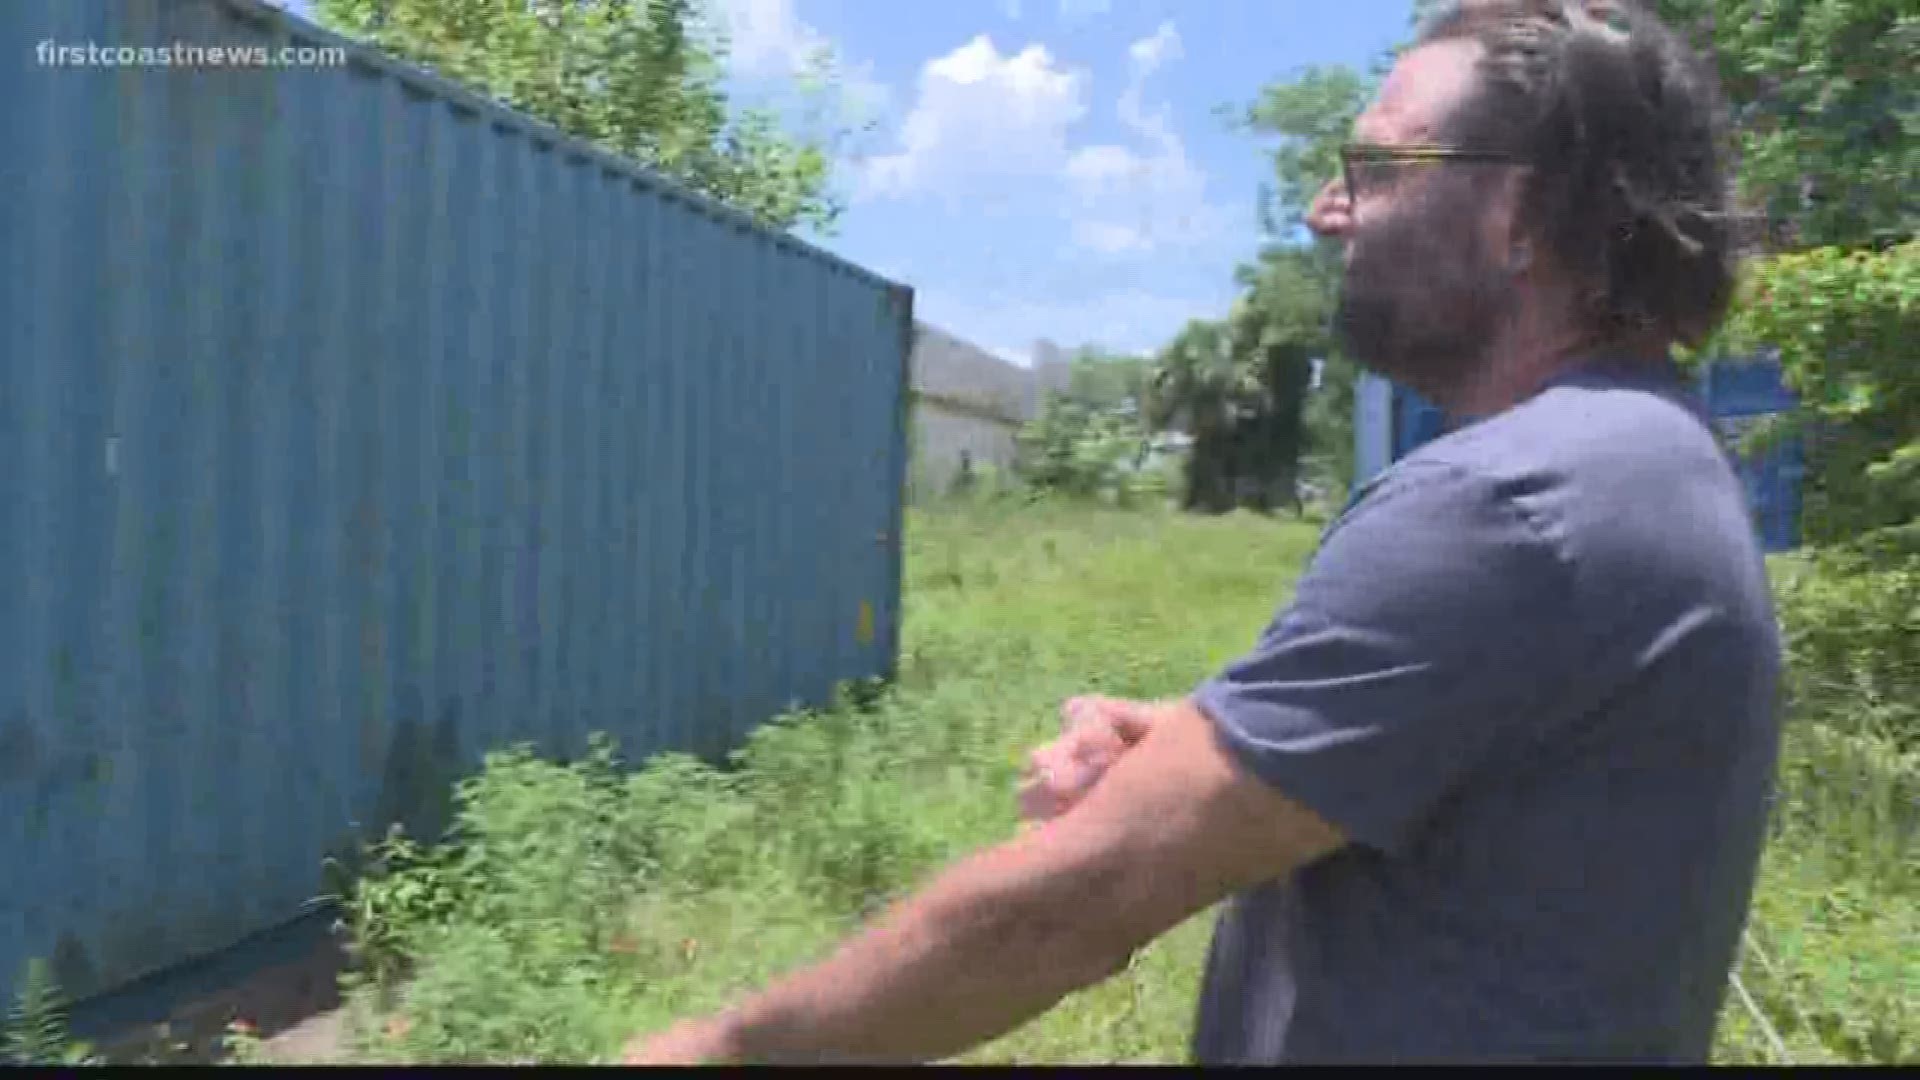 FCN's Jessica Clark reports on what a man in St. Augustine is doing after his home was destroyed during Hurricane Irma.